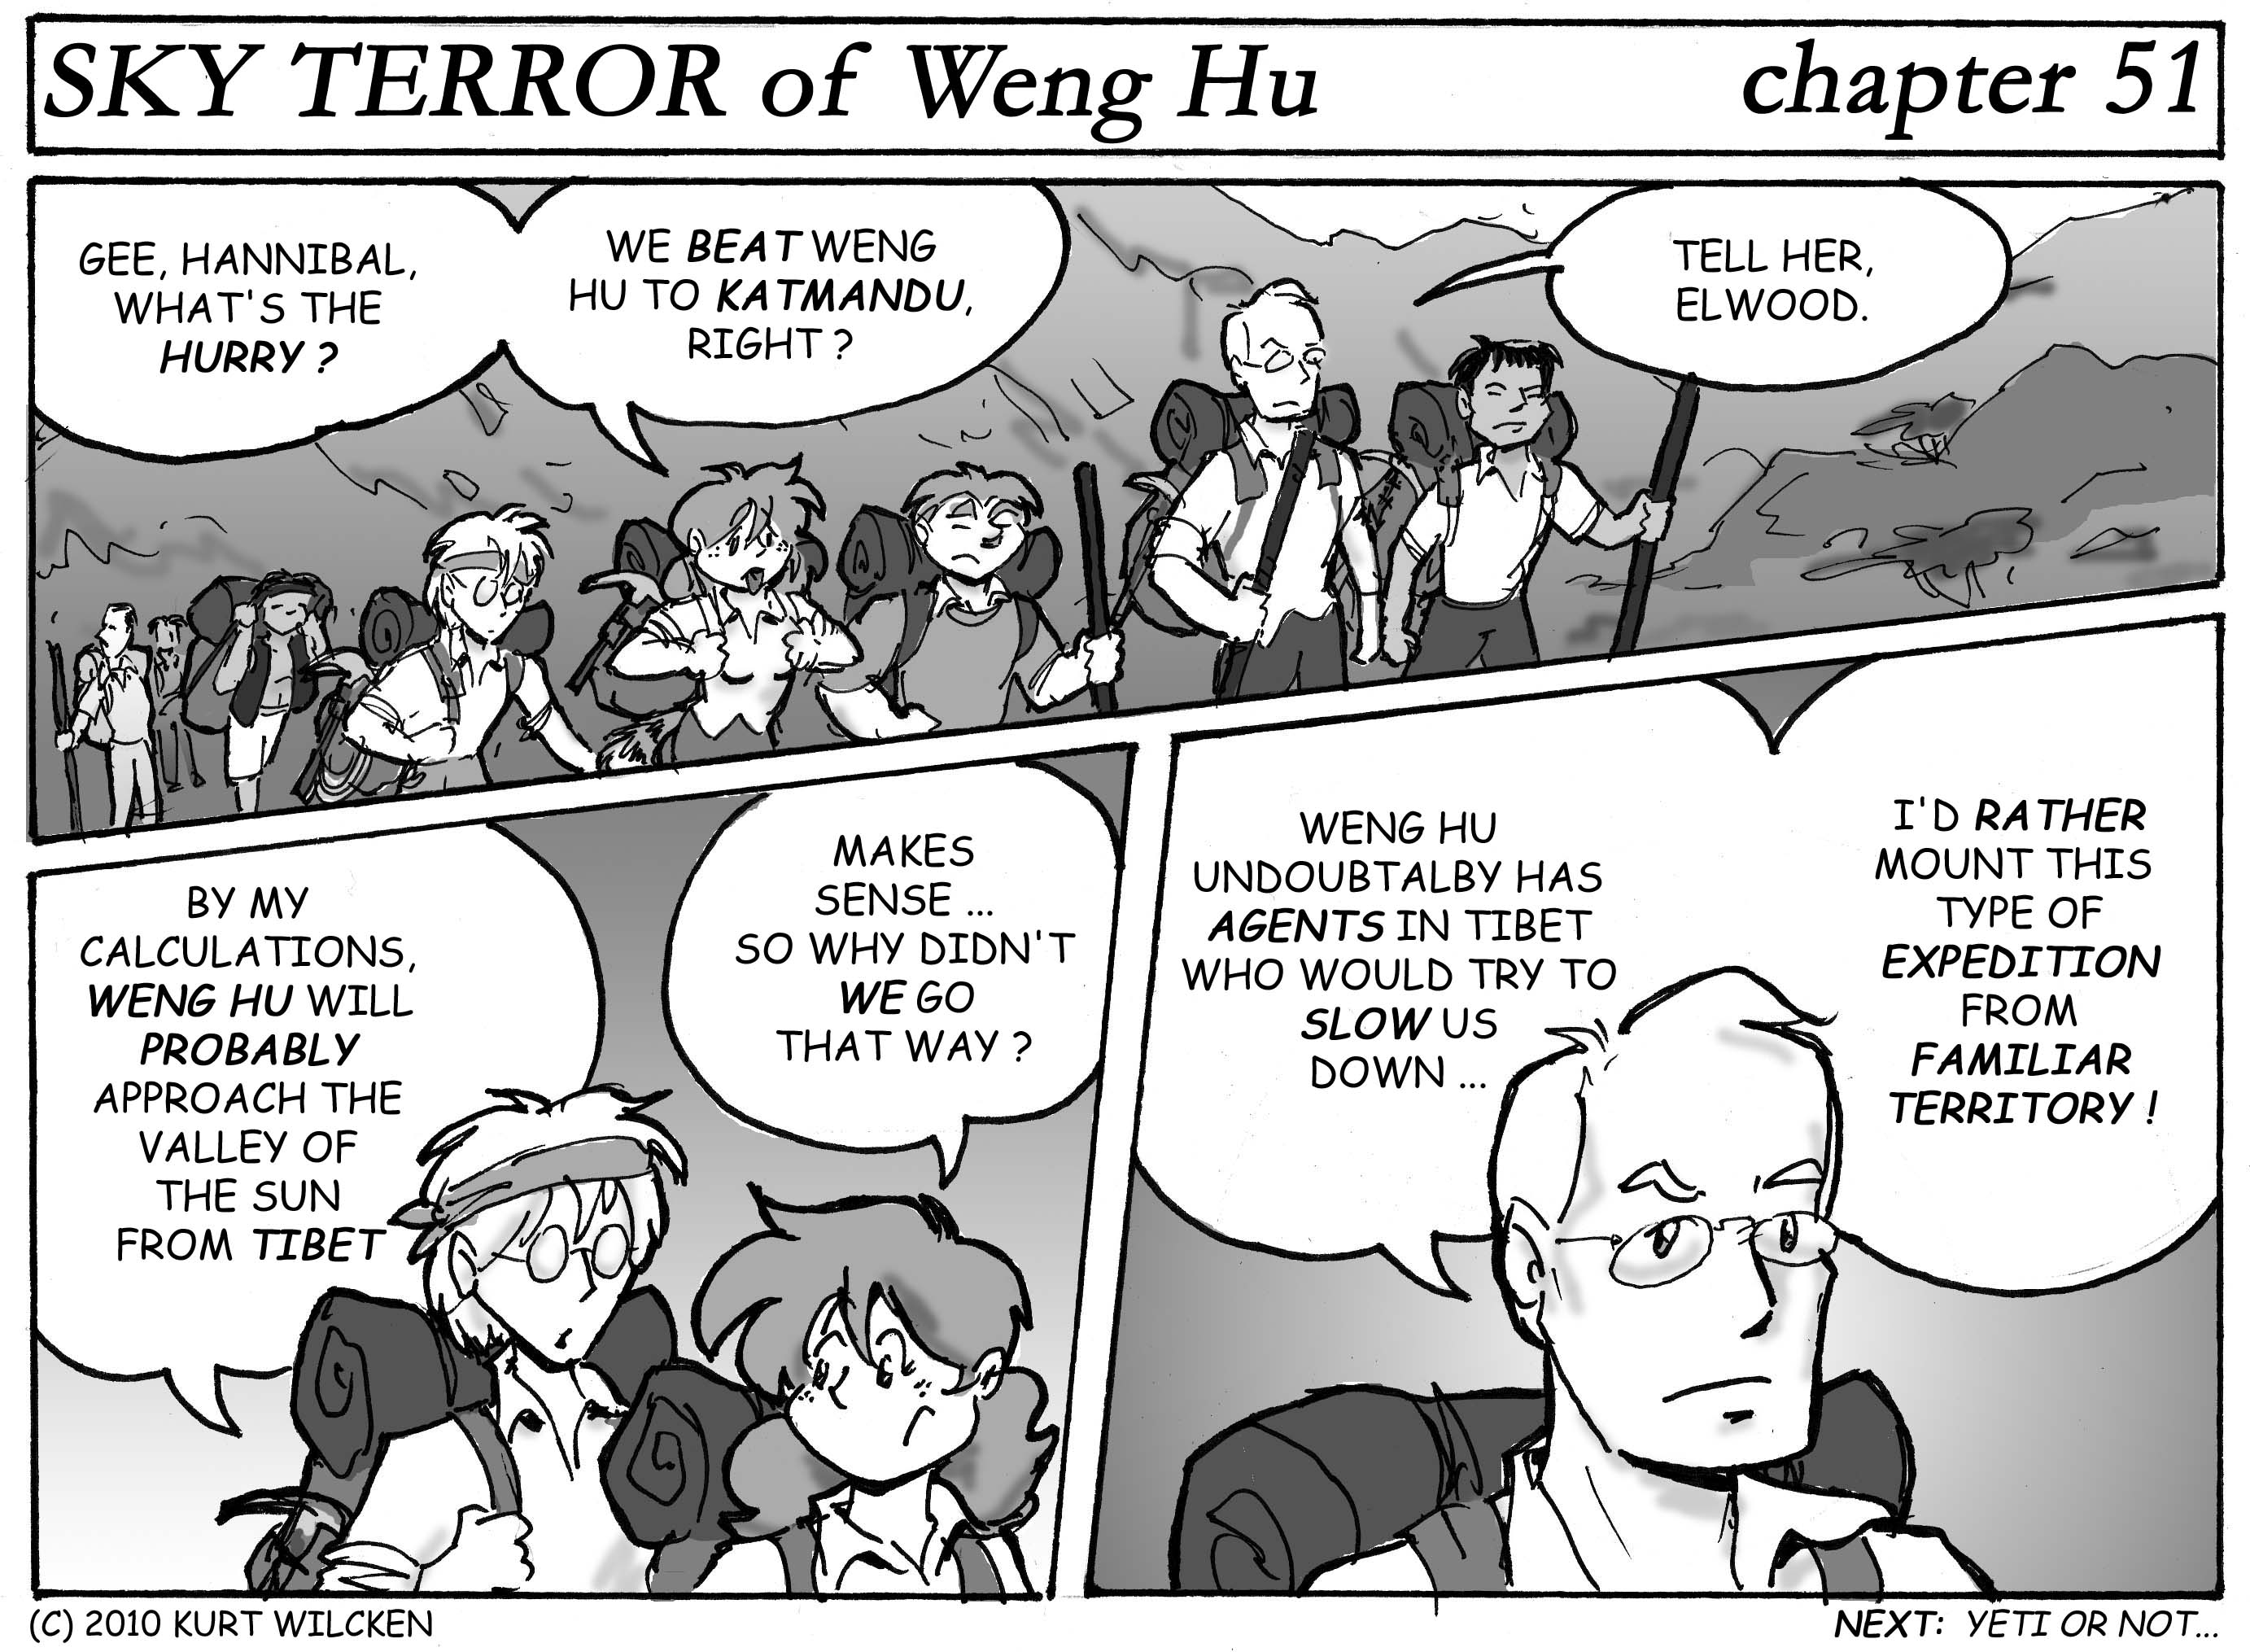 SKY TERROR of Weng Hu:  Chapter 51 — Into the Mountains